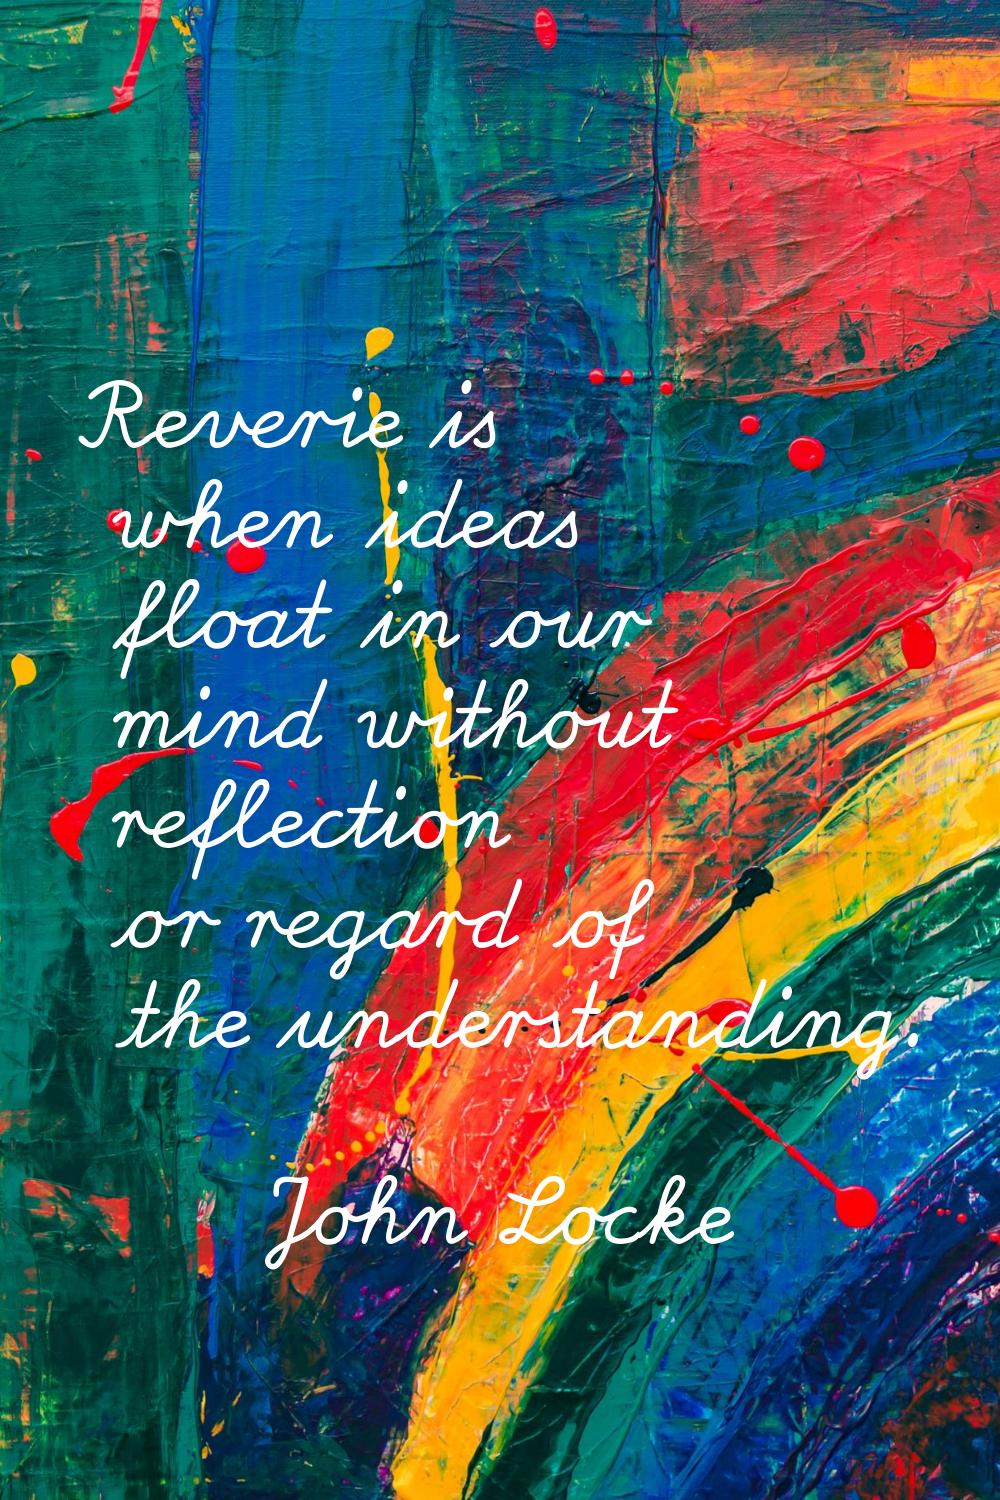 Reverie is when ideas float in our mind without reflection or regard of the understanding.